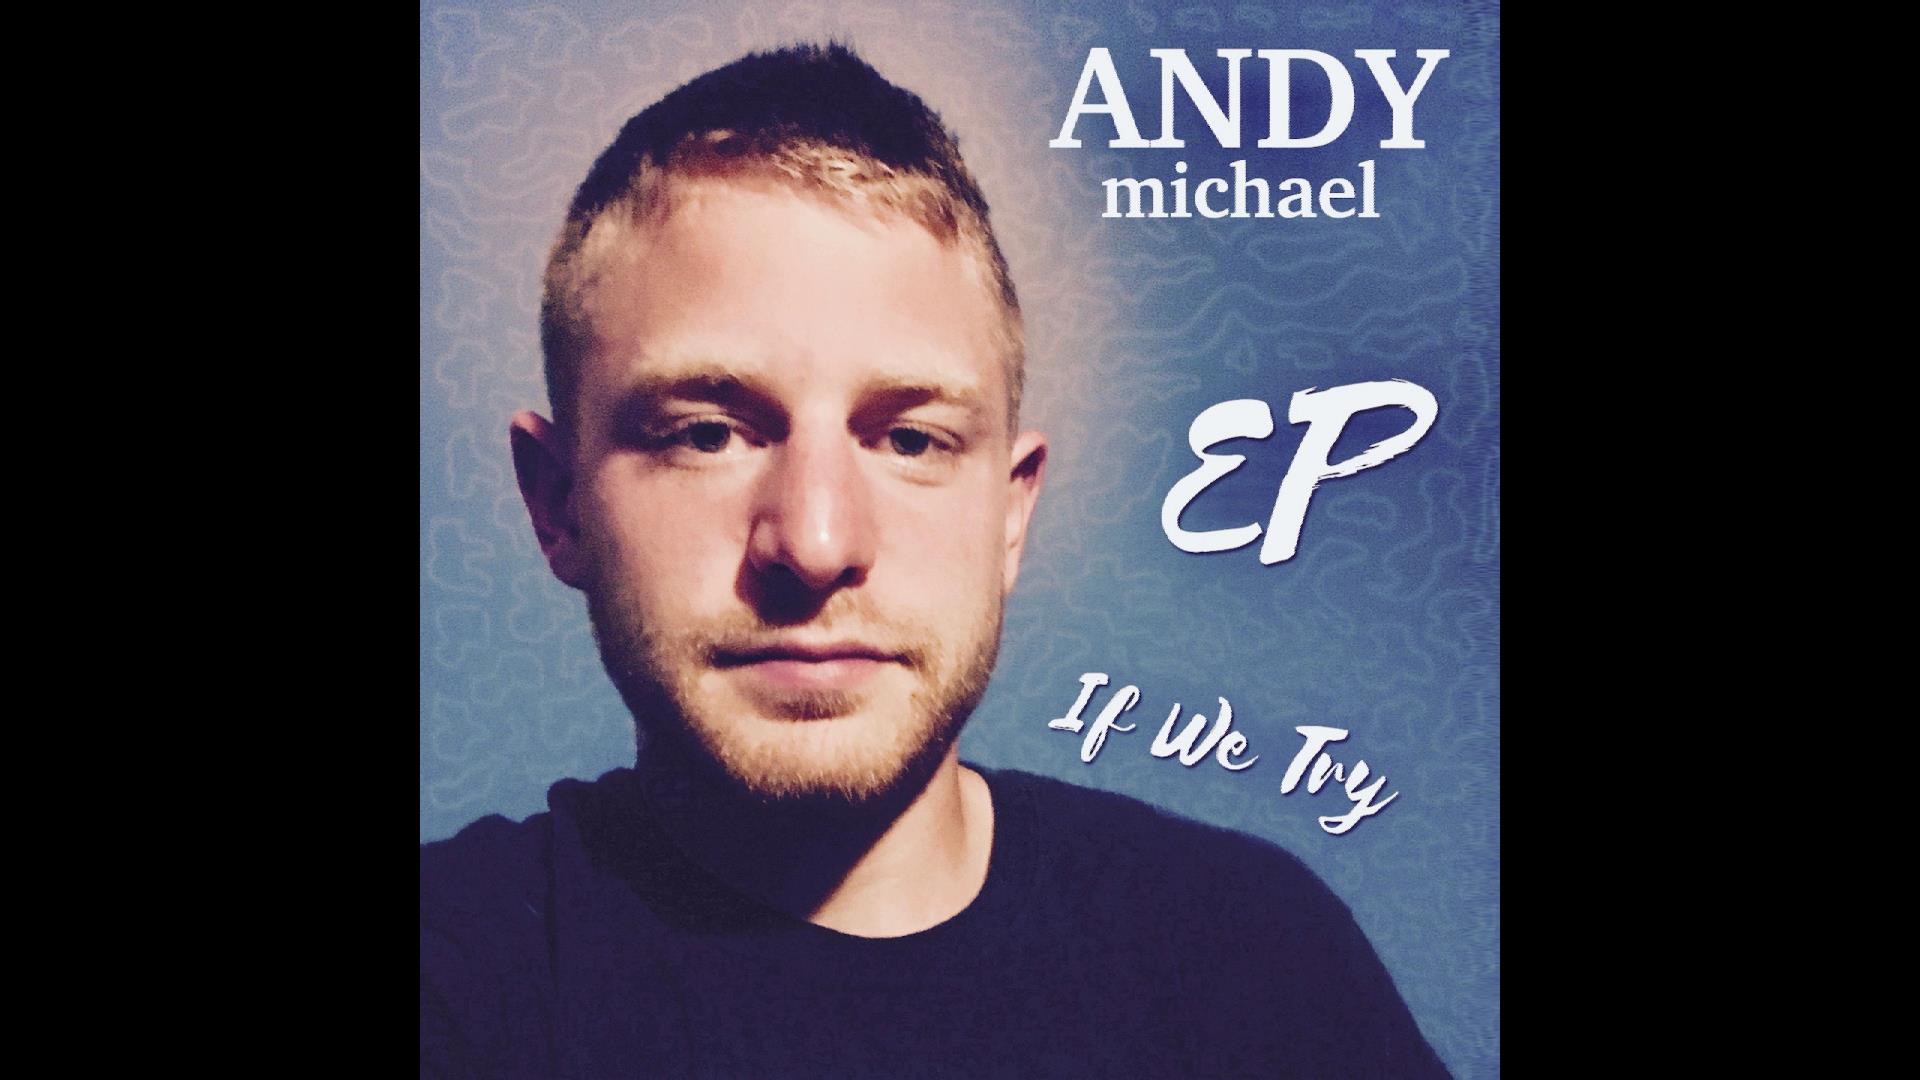  Andy Michael – If We Try